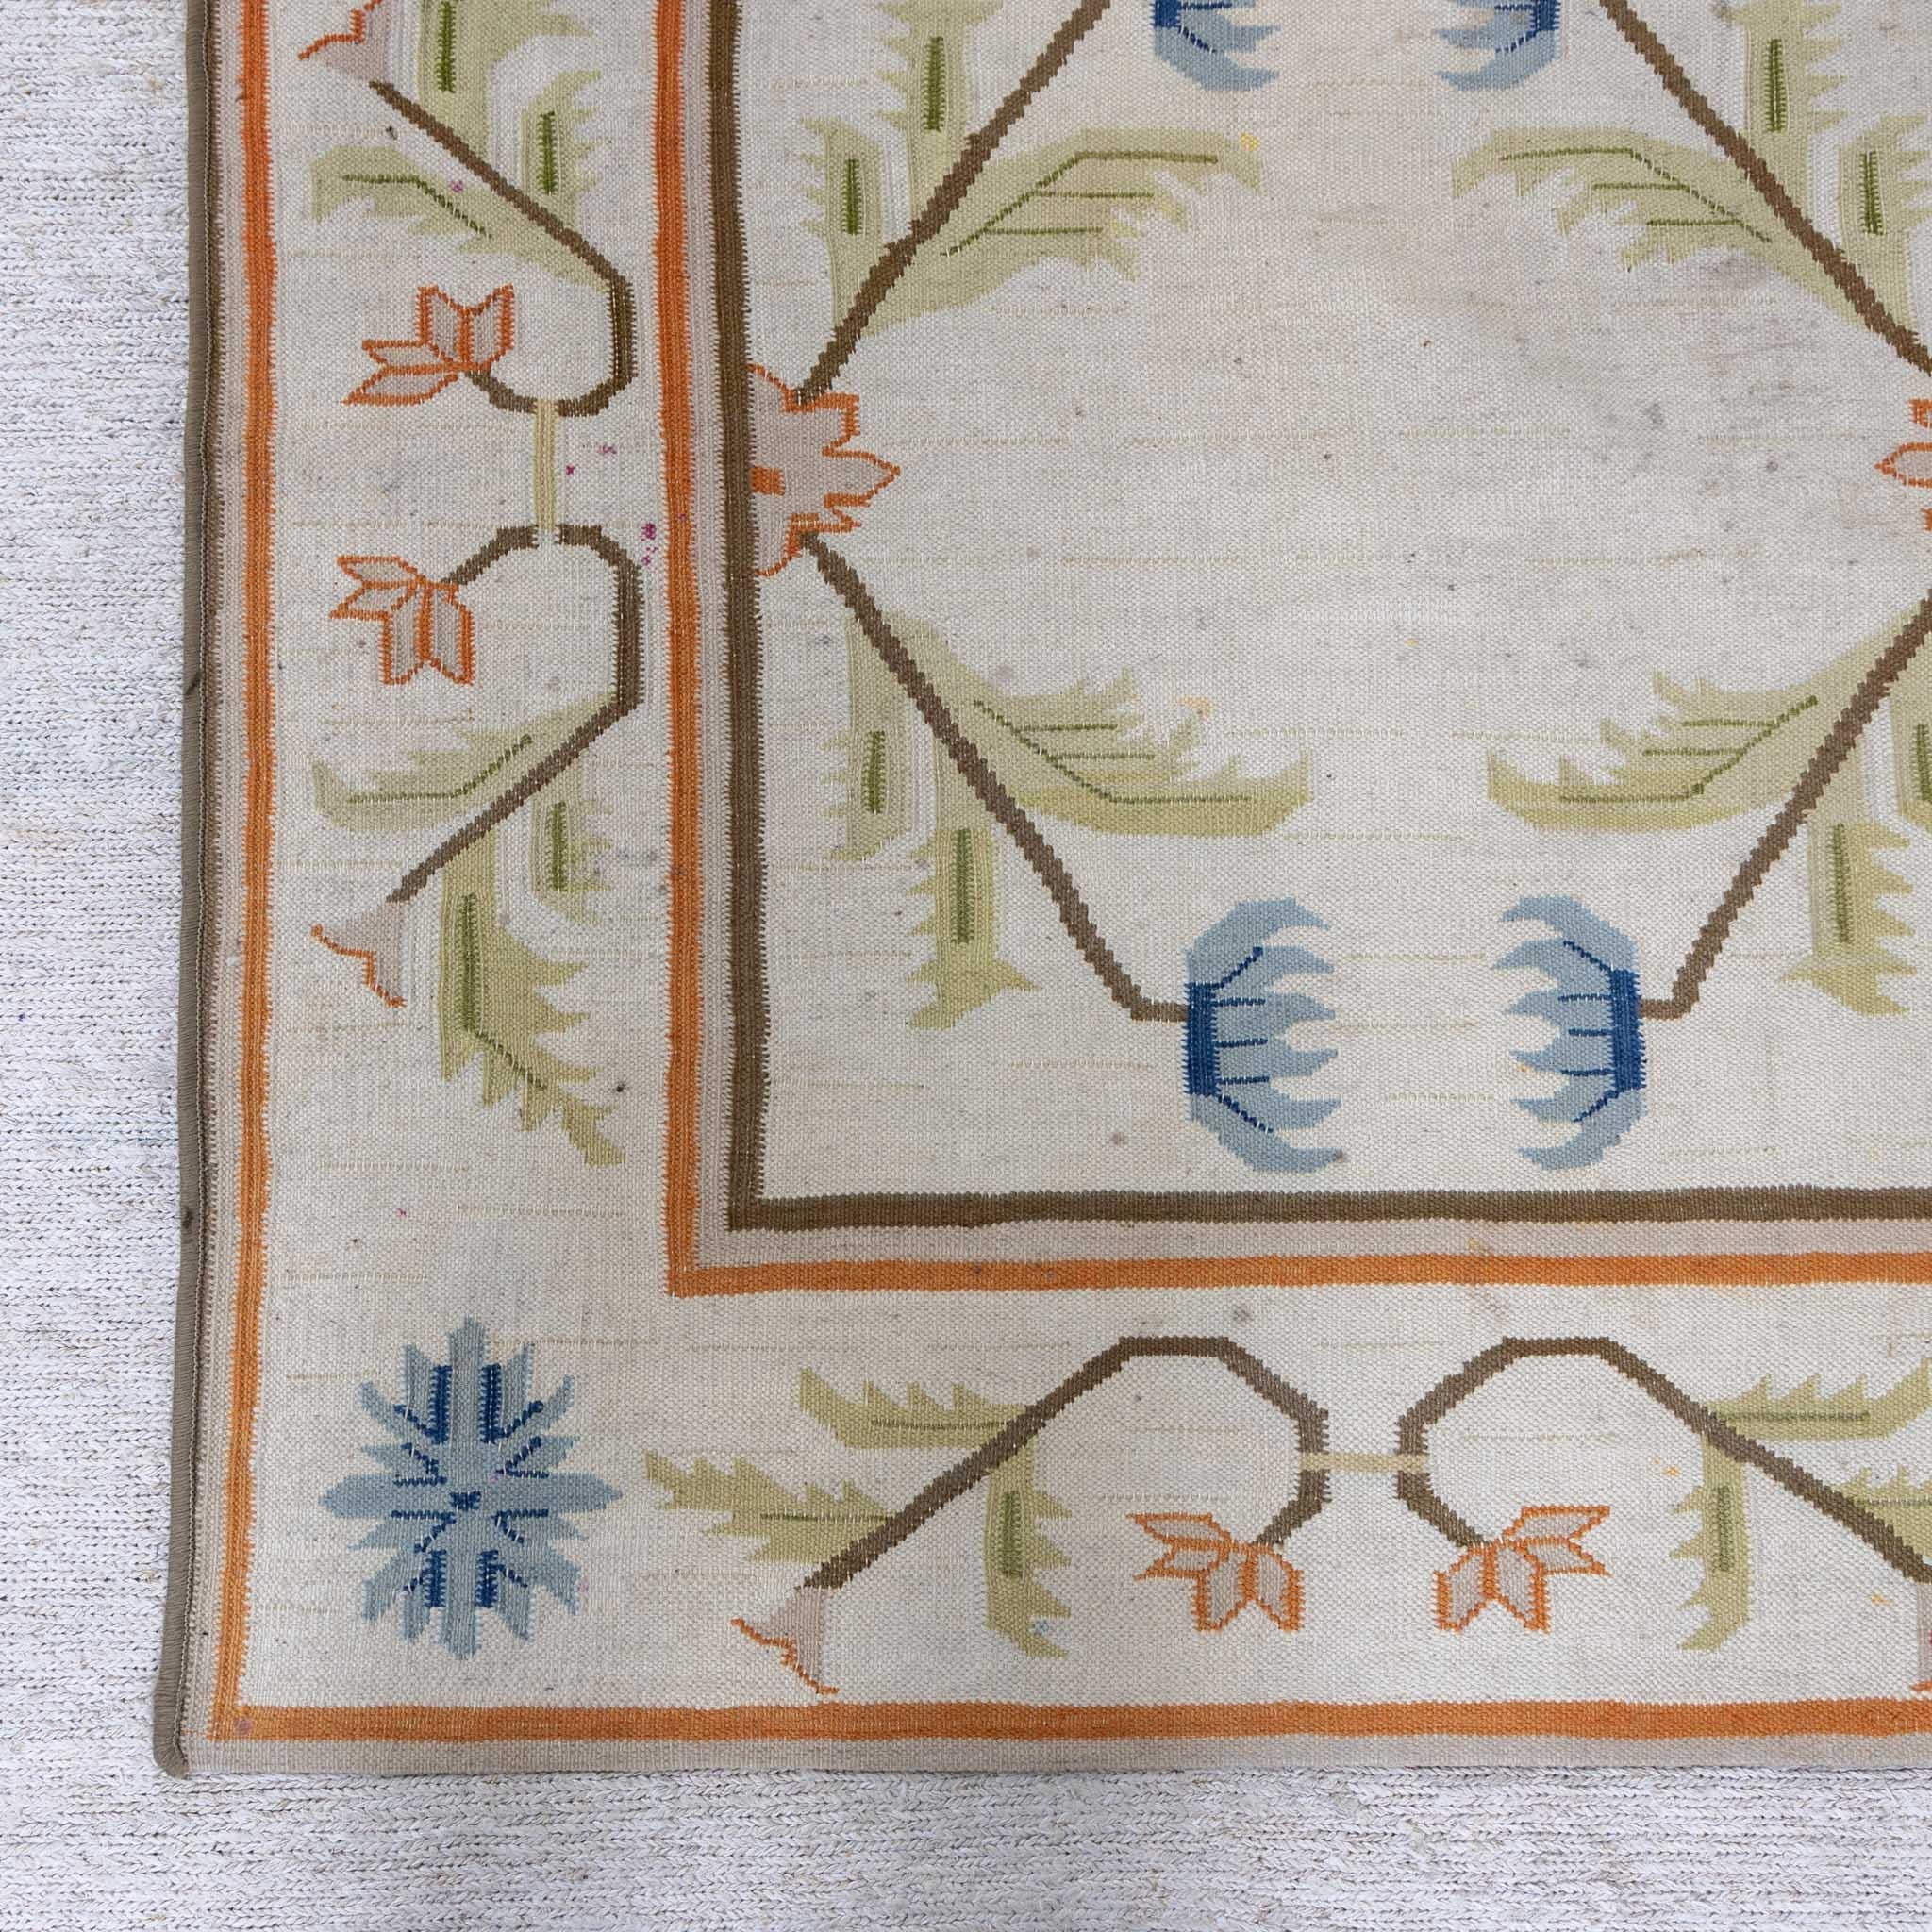 Large 1970s carpet with floral decoration on beige ground and surrounding framing in orange and brown. Signs of age and use.